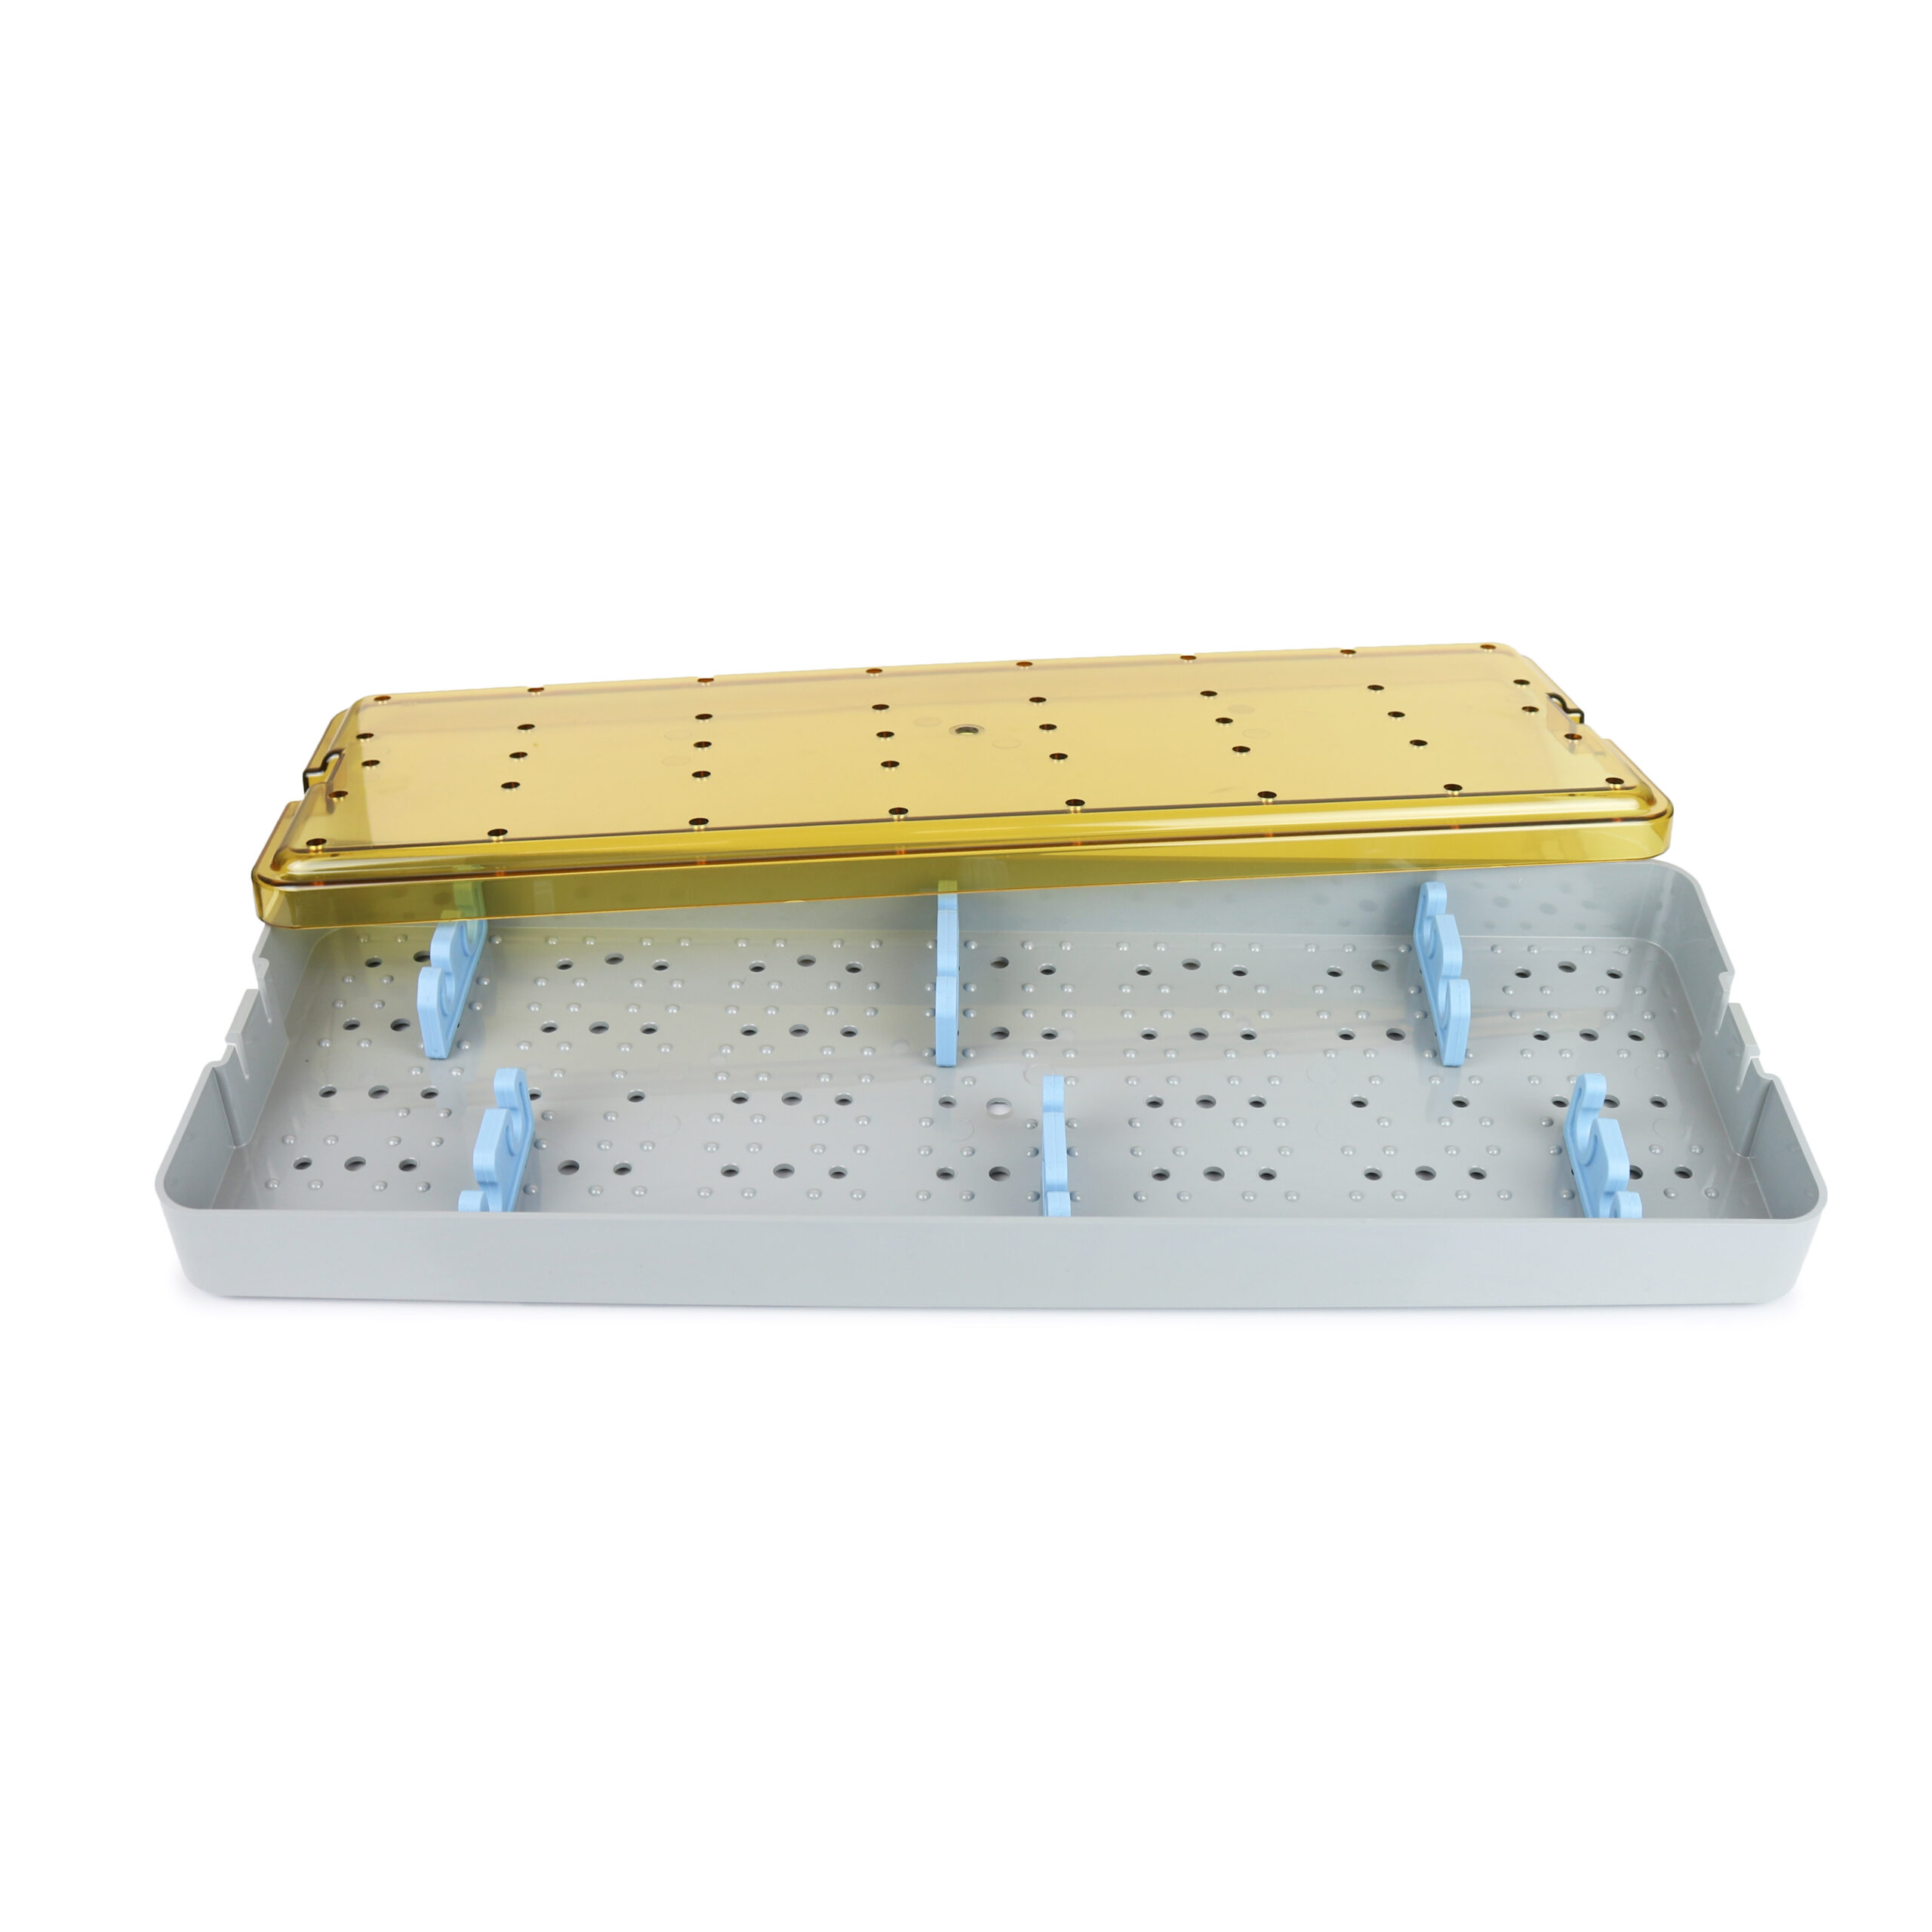 Sterilization Products - Slotted Count Sheet Holder - Healthmark Industries